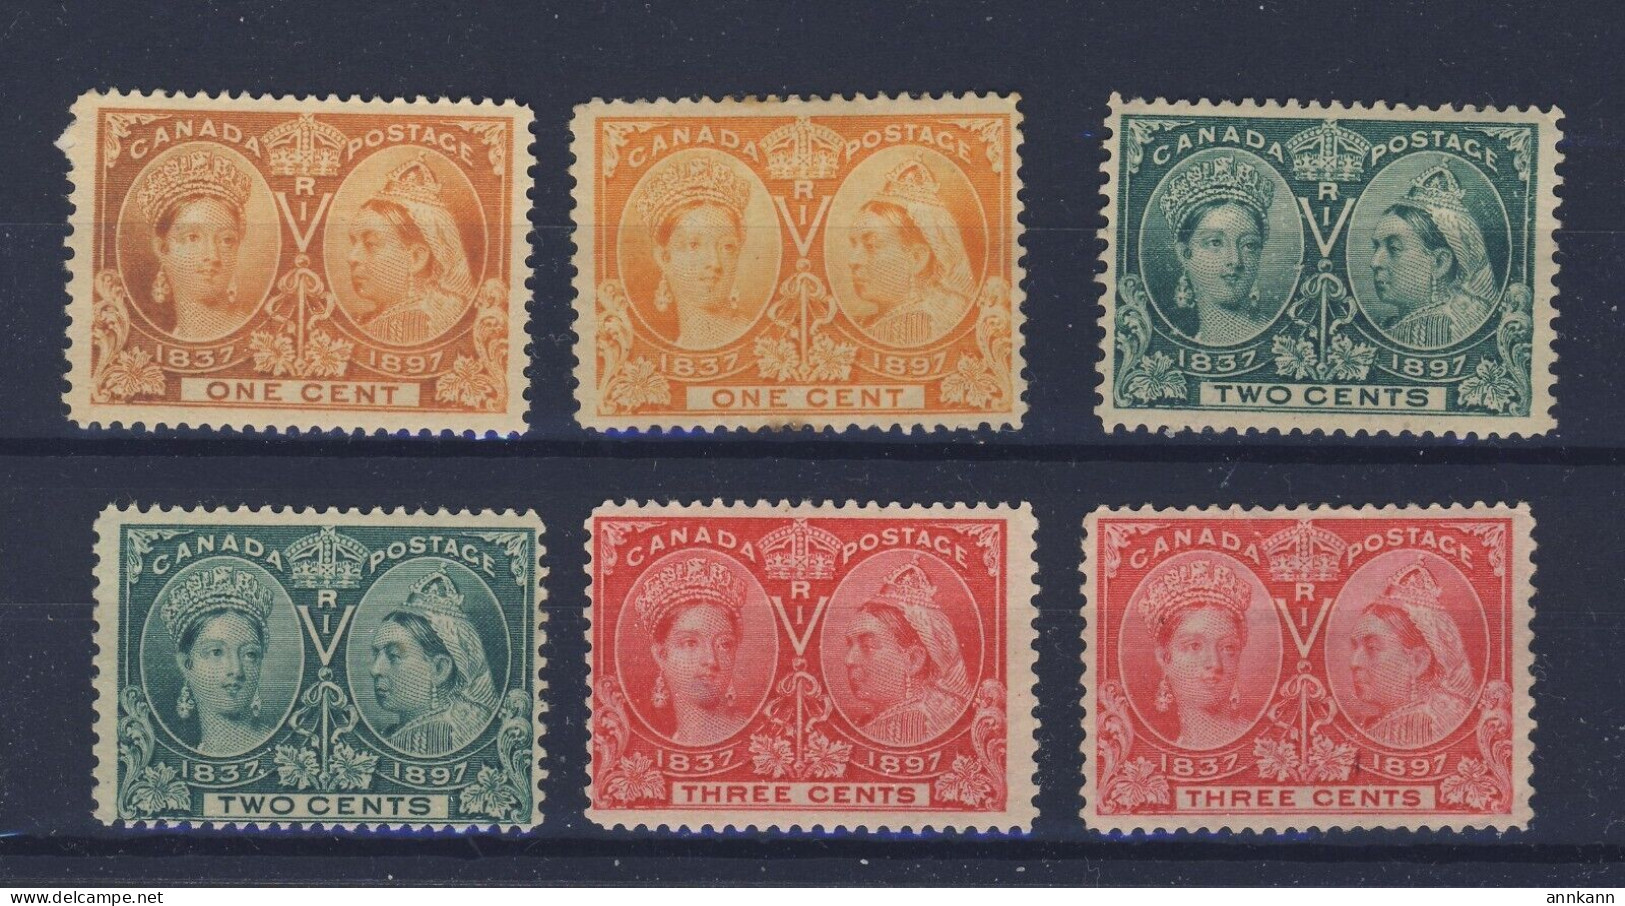 6x Canada Victoria Jubilee Stamps #51-51i-52-52i-53-53i. Guide Value = $87.00 - Unused Stamps